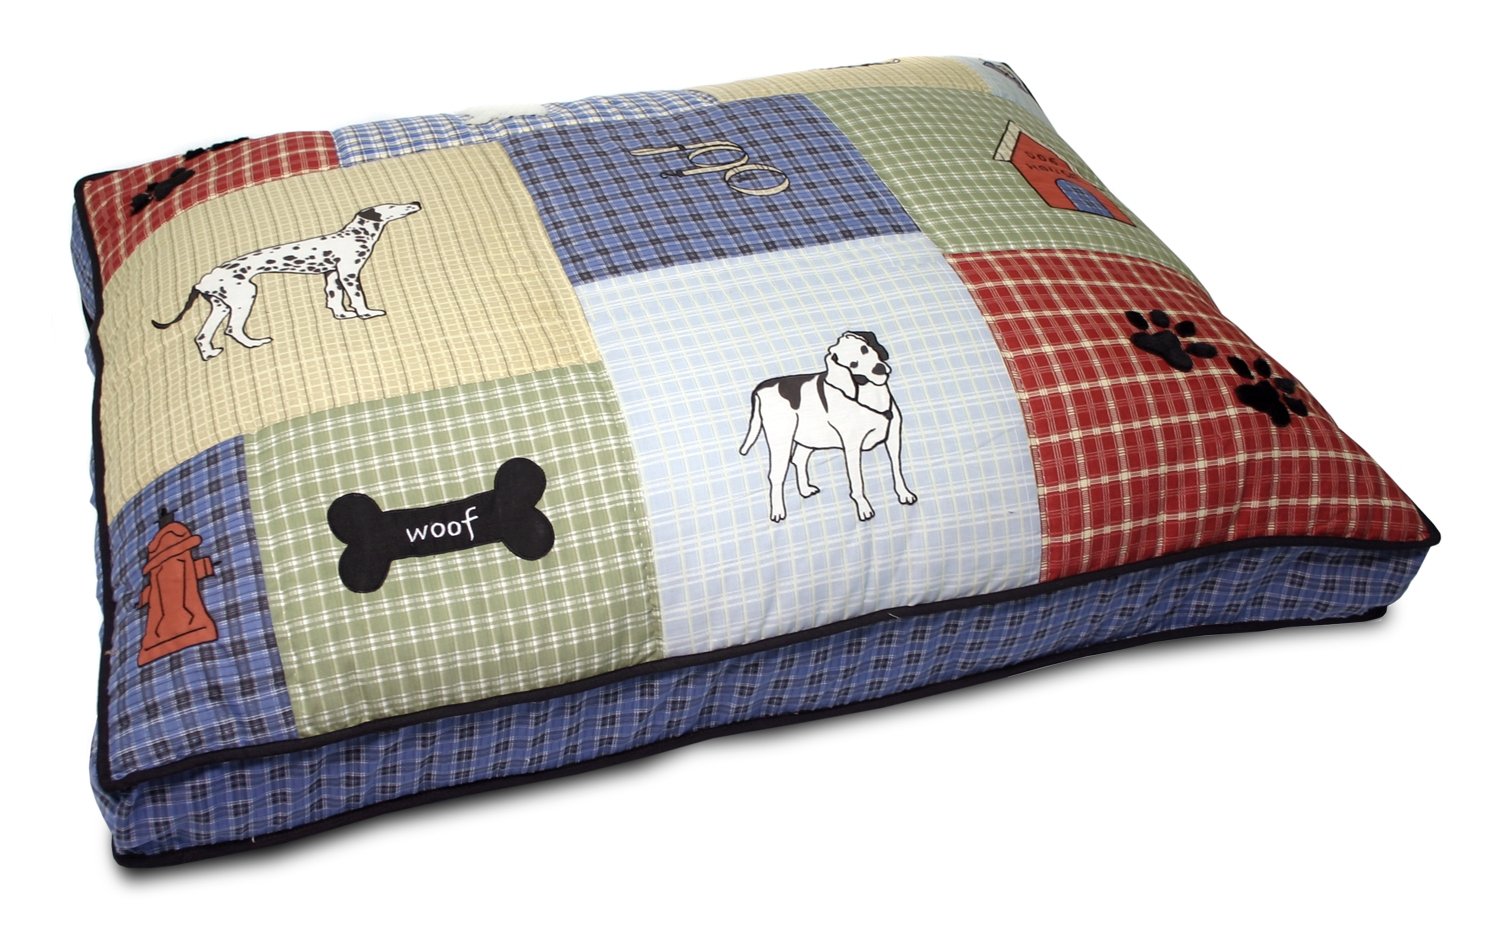 Petmate Quilted Applique Dog Bed, Classic Dog Motif, Large Grand, 27" x 36", Multicolored- Designs May Vary